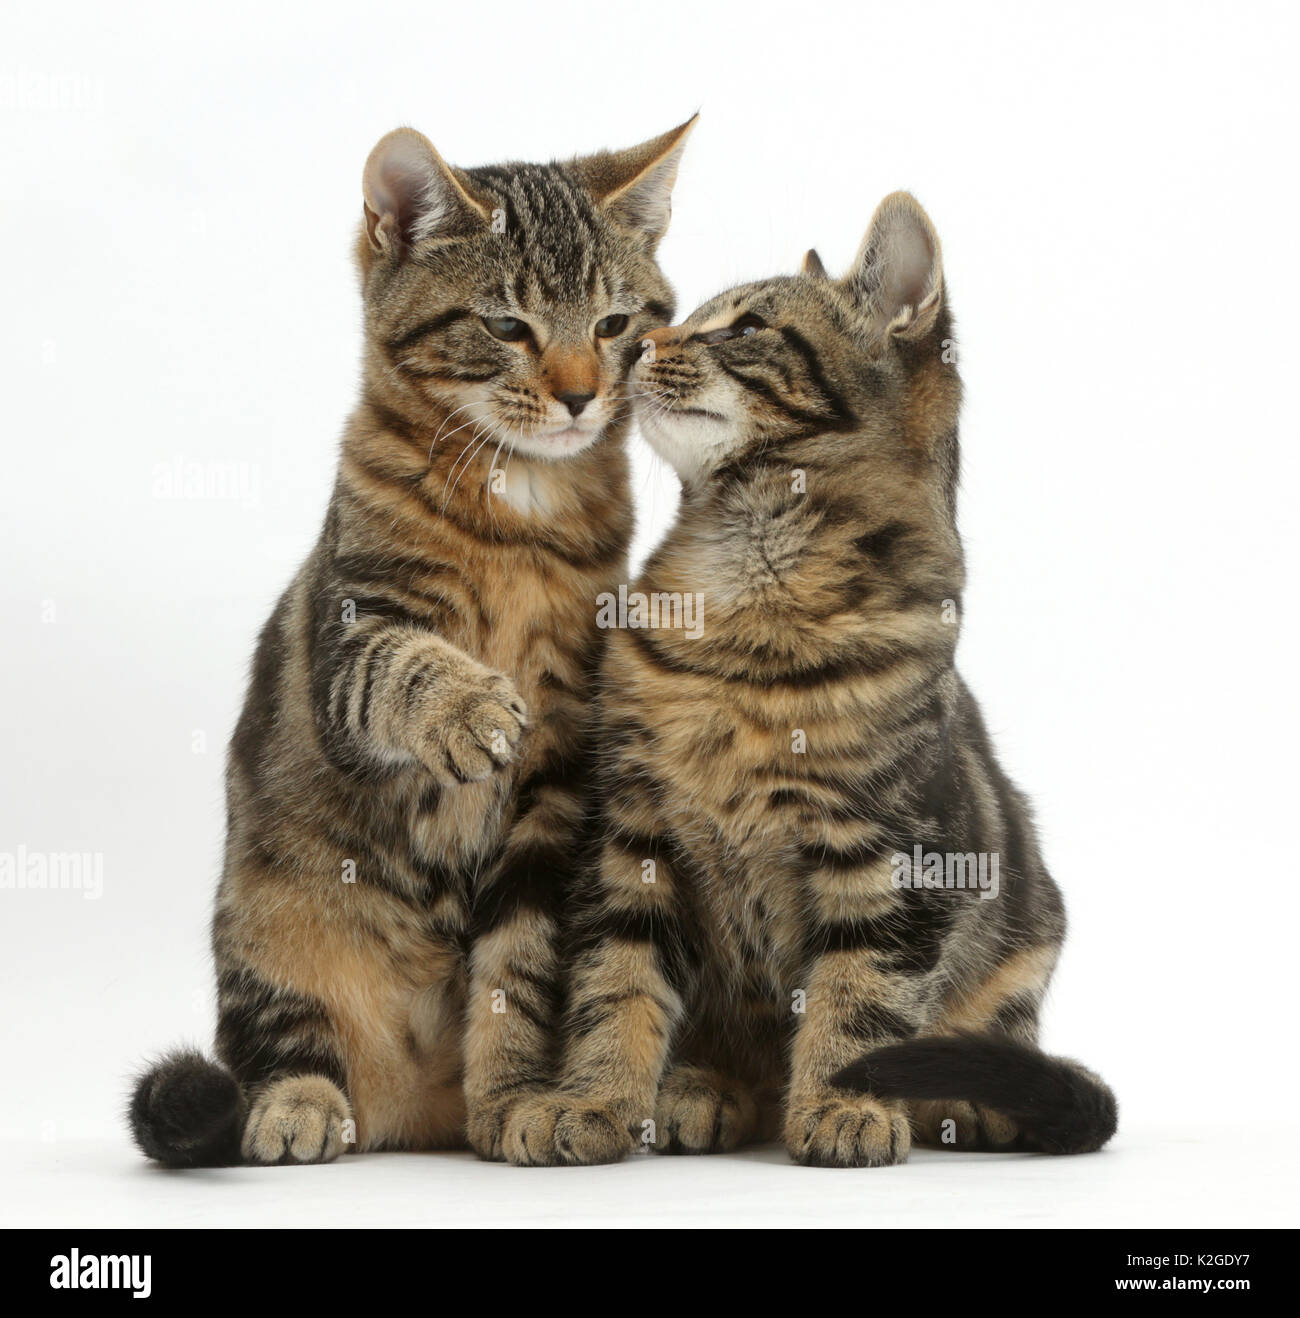 Tabby cats, Picasso and Smudge, age 3 months, sitting together. Stock Photo